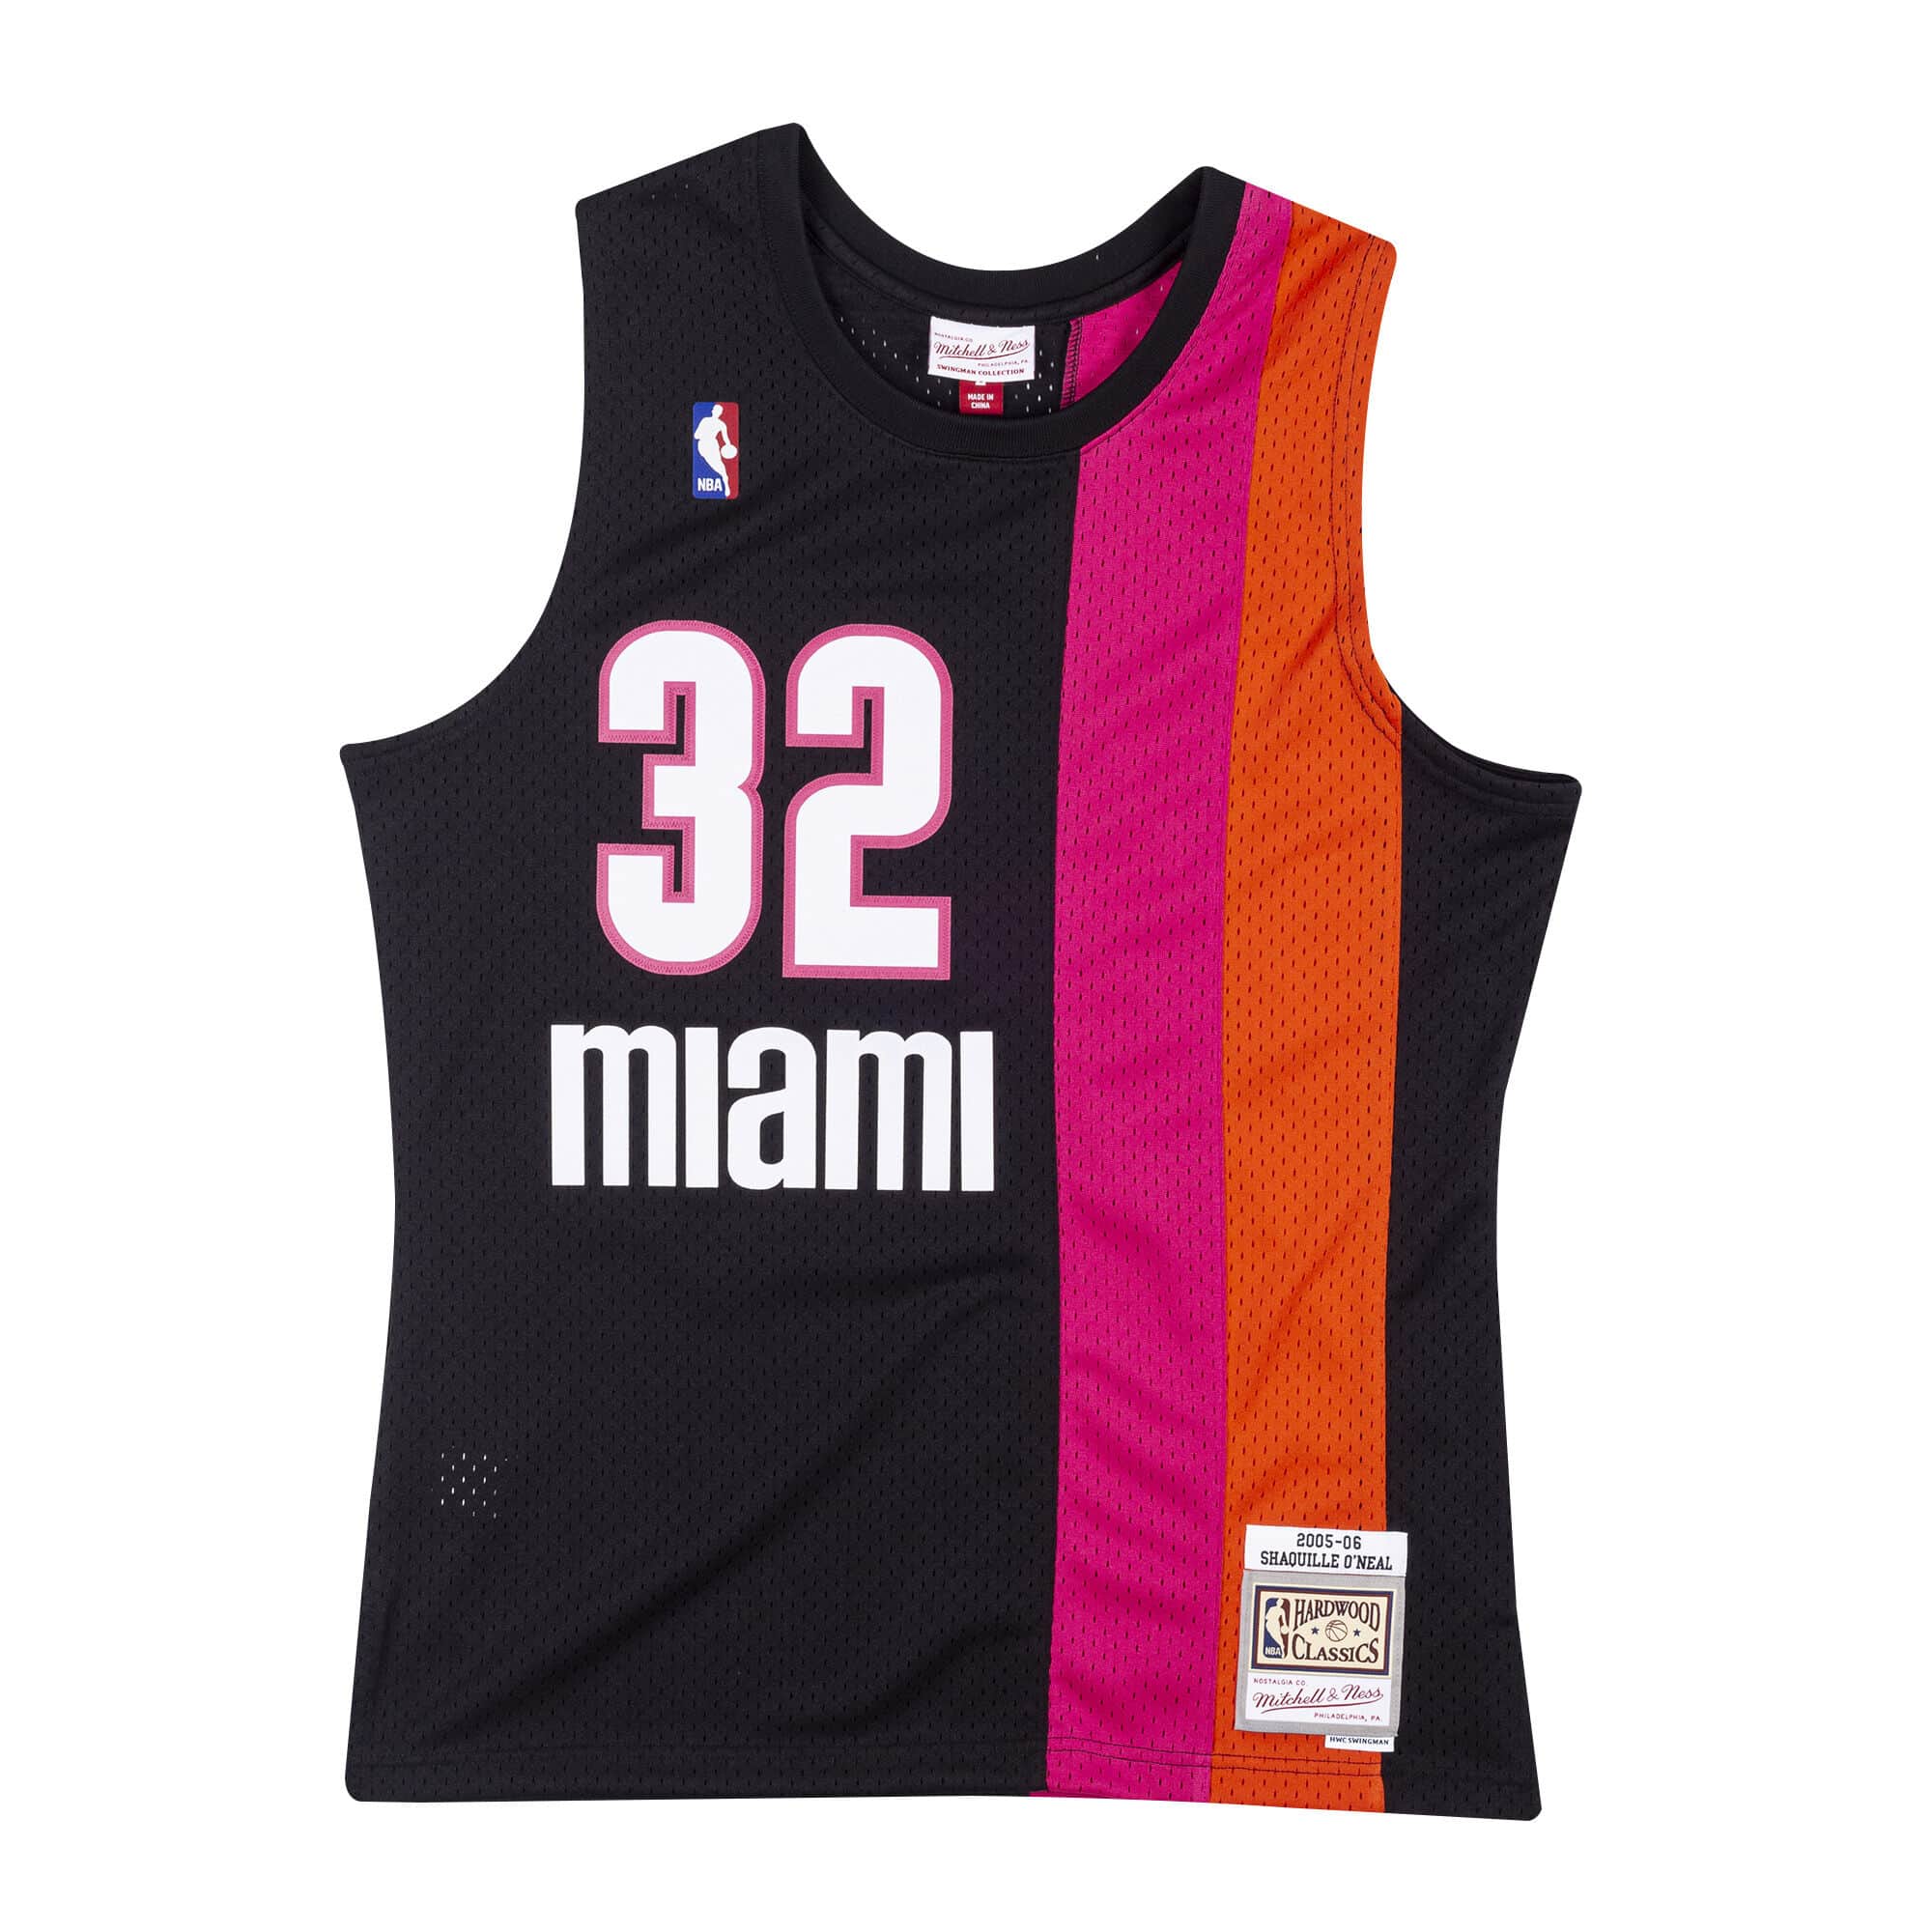 adidas Shaquille O'Neal NBA Jerseys for sale